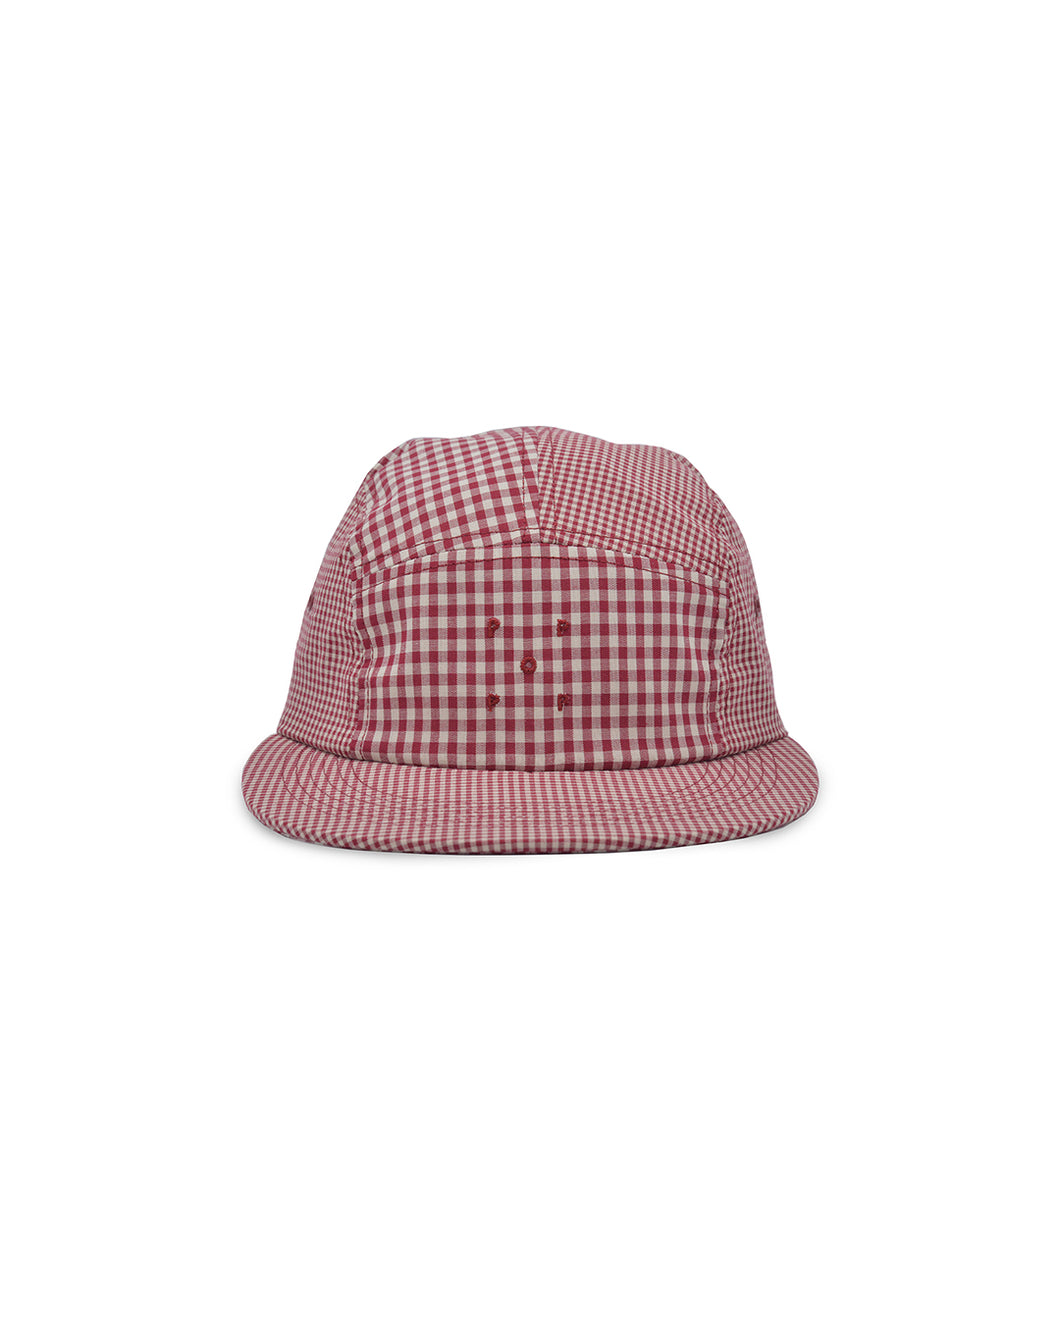 FIVE PANEL HAT - RED/WHITE